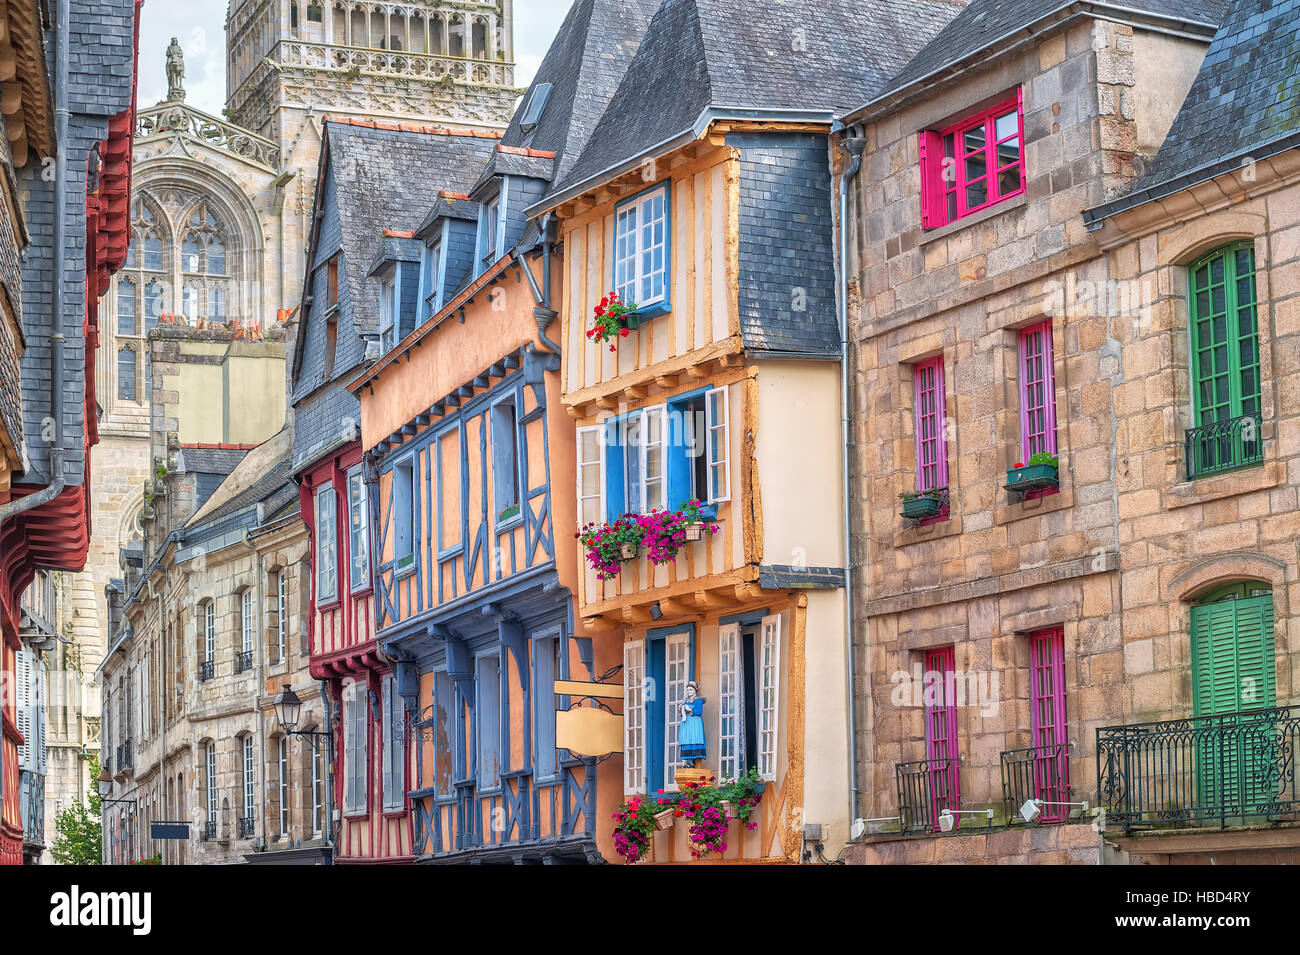 Old town of Quimper, Brittany, France Stock Photo